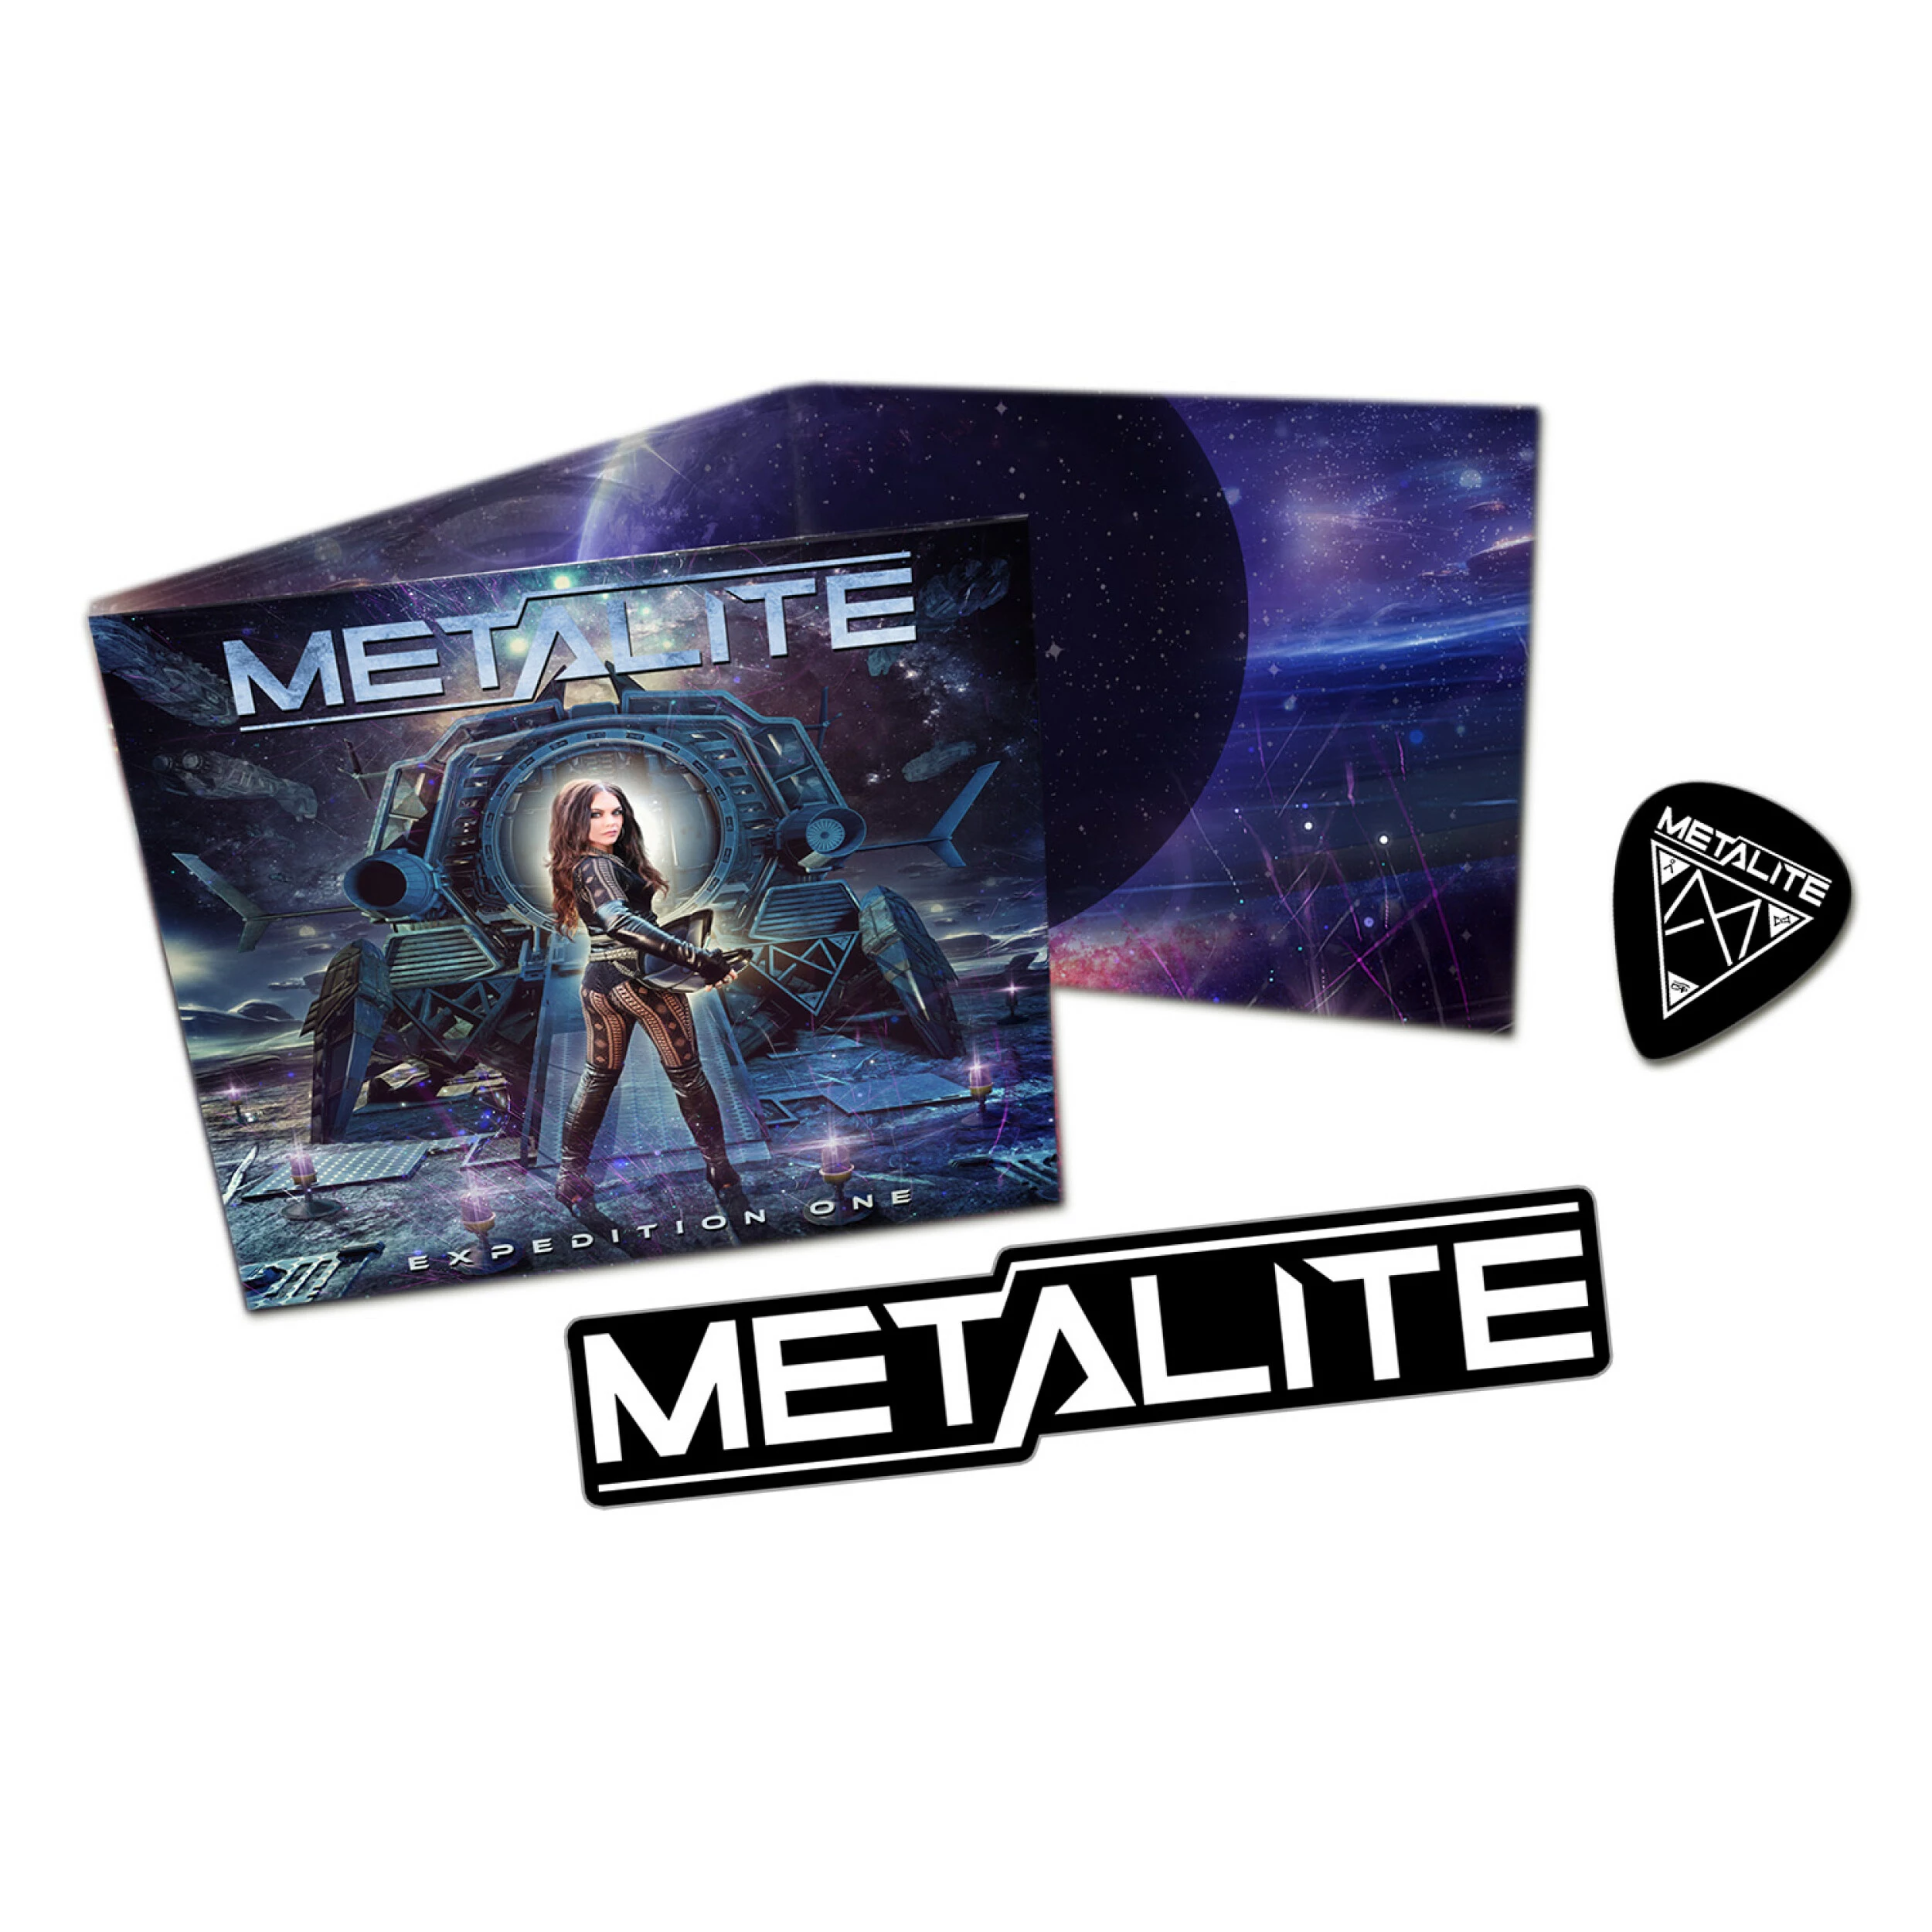 METALITE - Expedition One (incl. Patch & Pick)  [DIGIPAK CD]